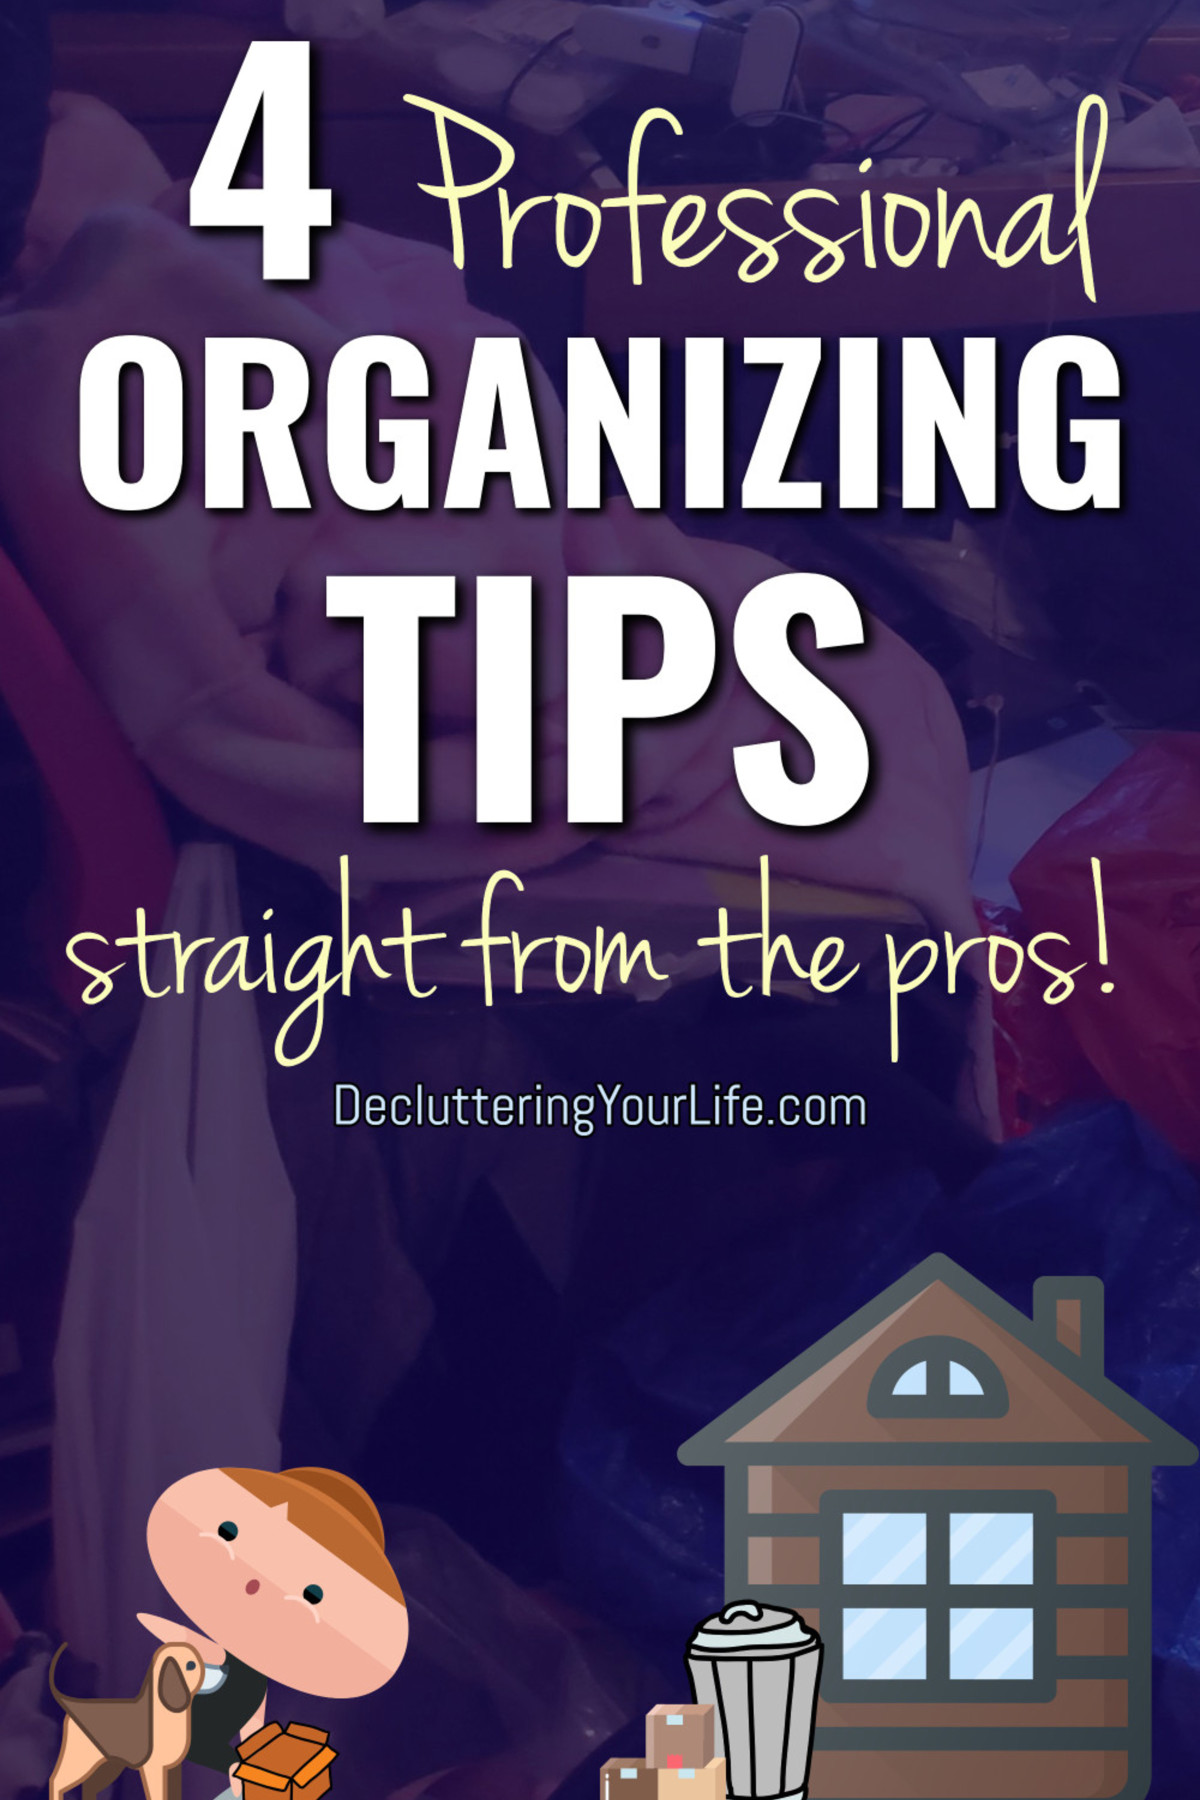 professional organizing tips straight from the pros